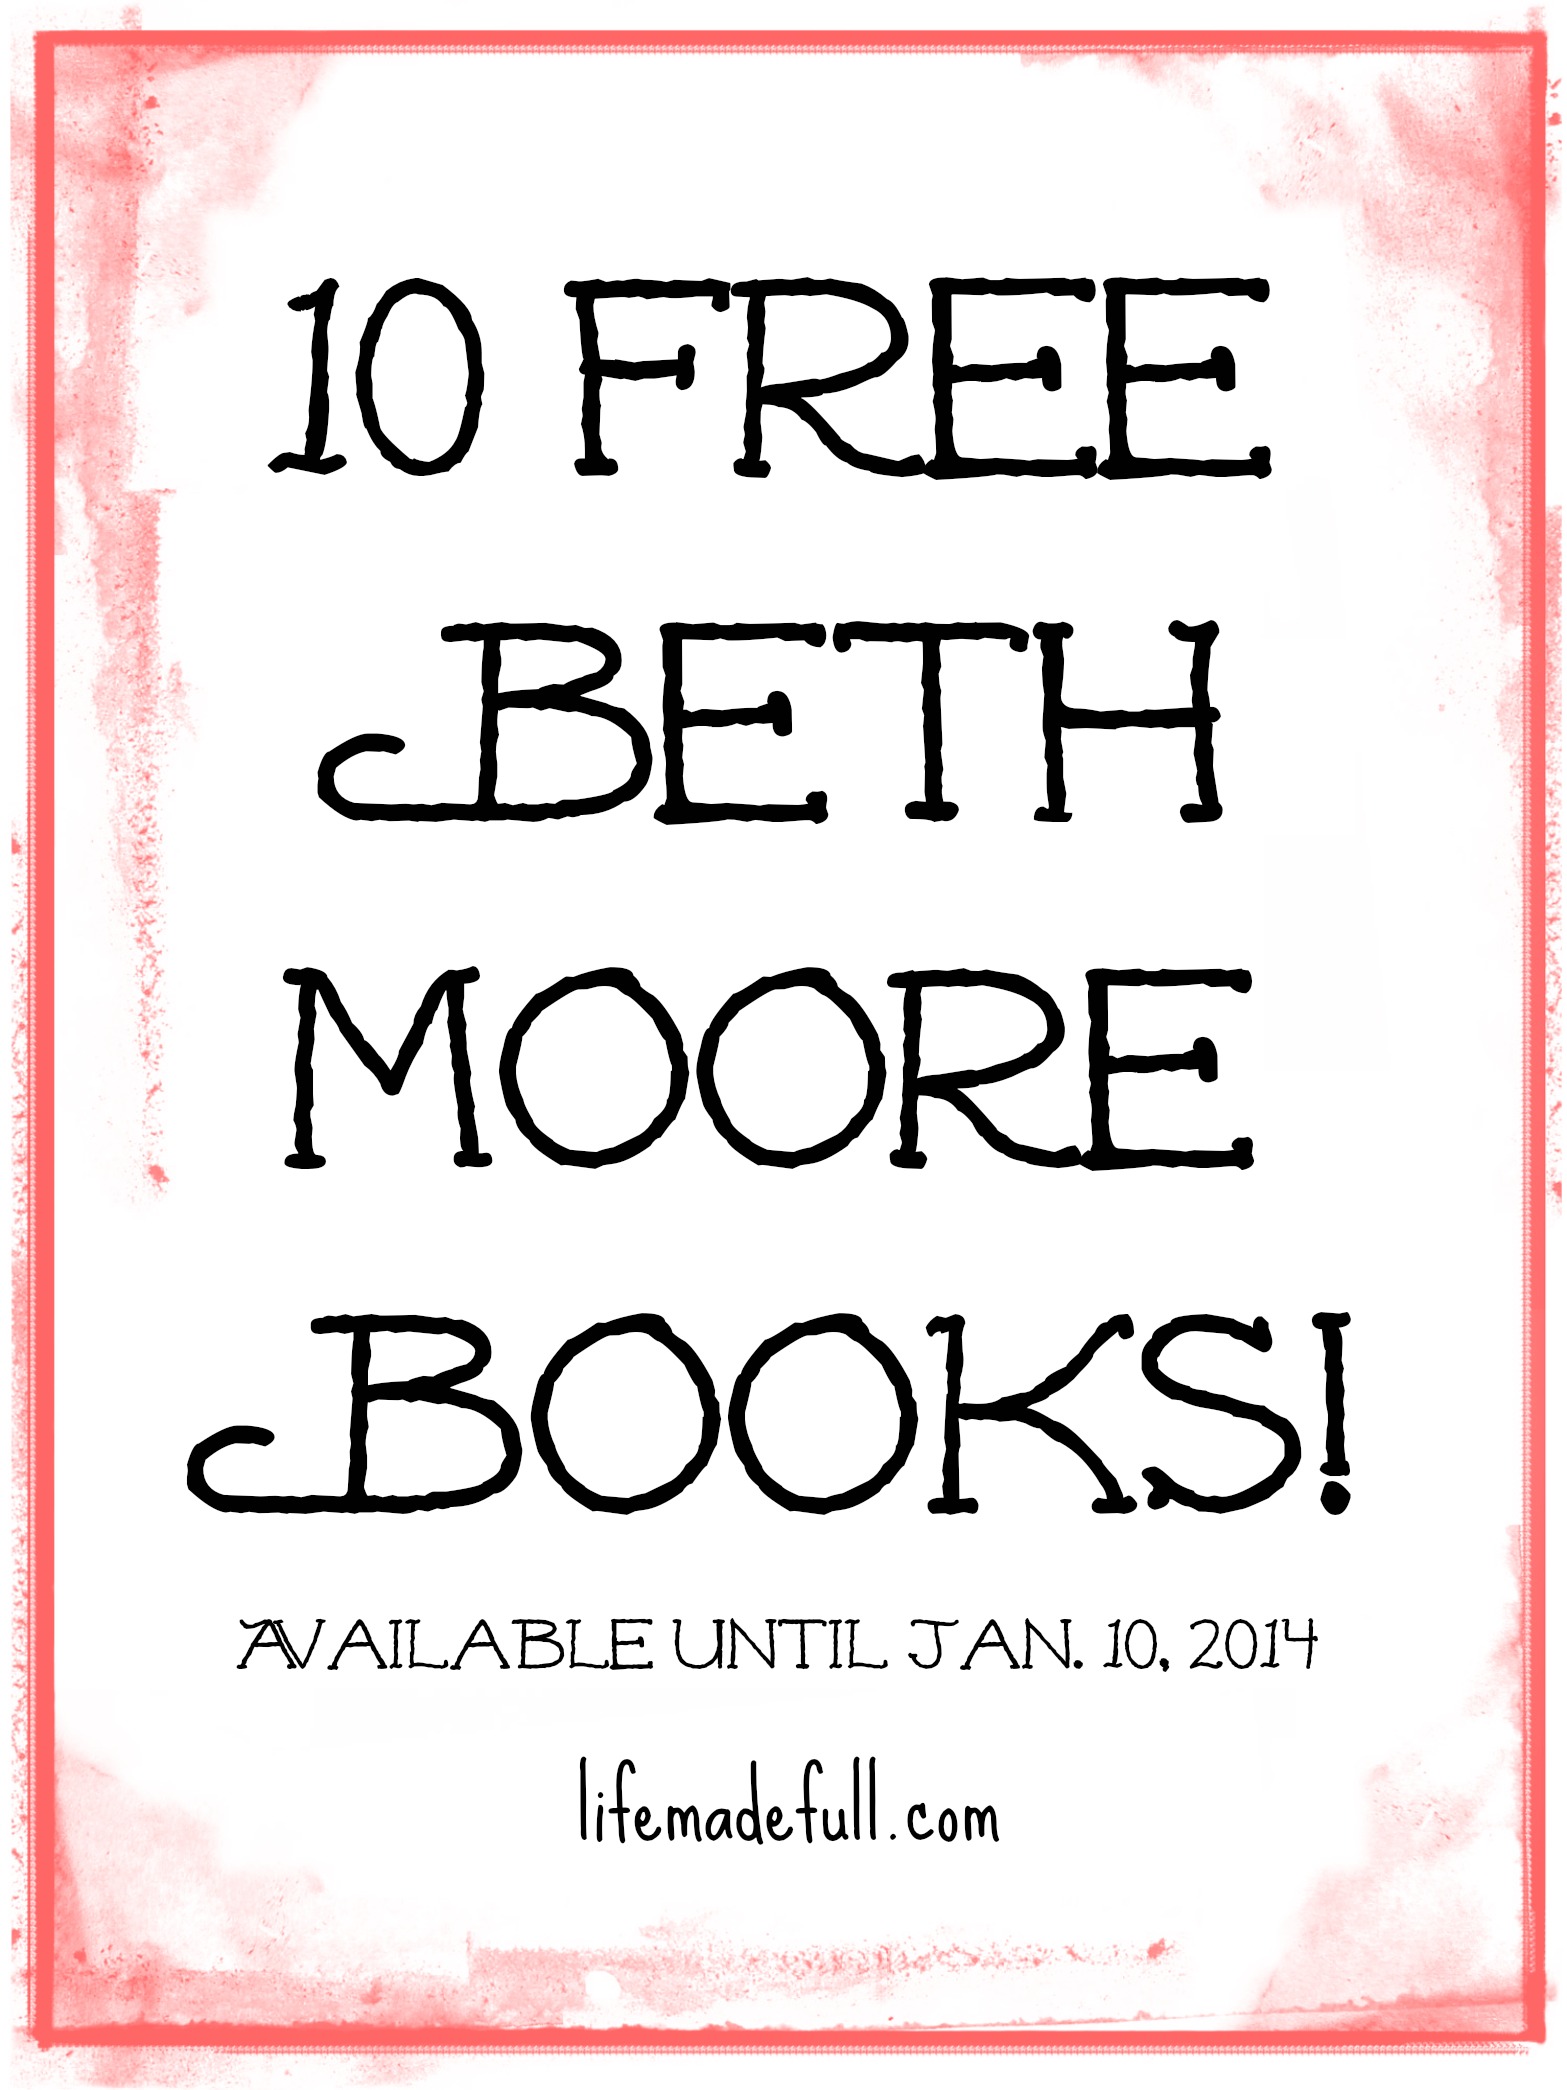 10 FREE Beth Moore Books (until January 10th)